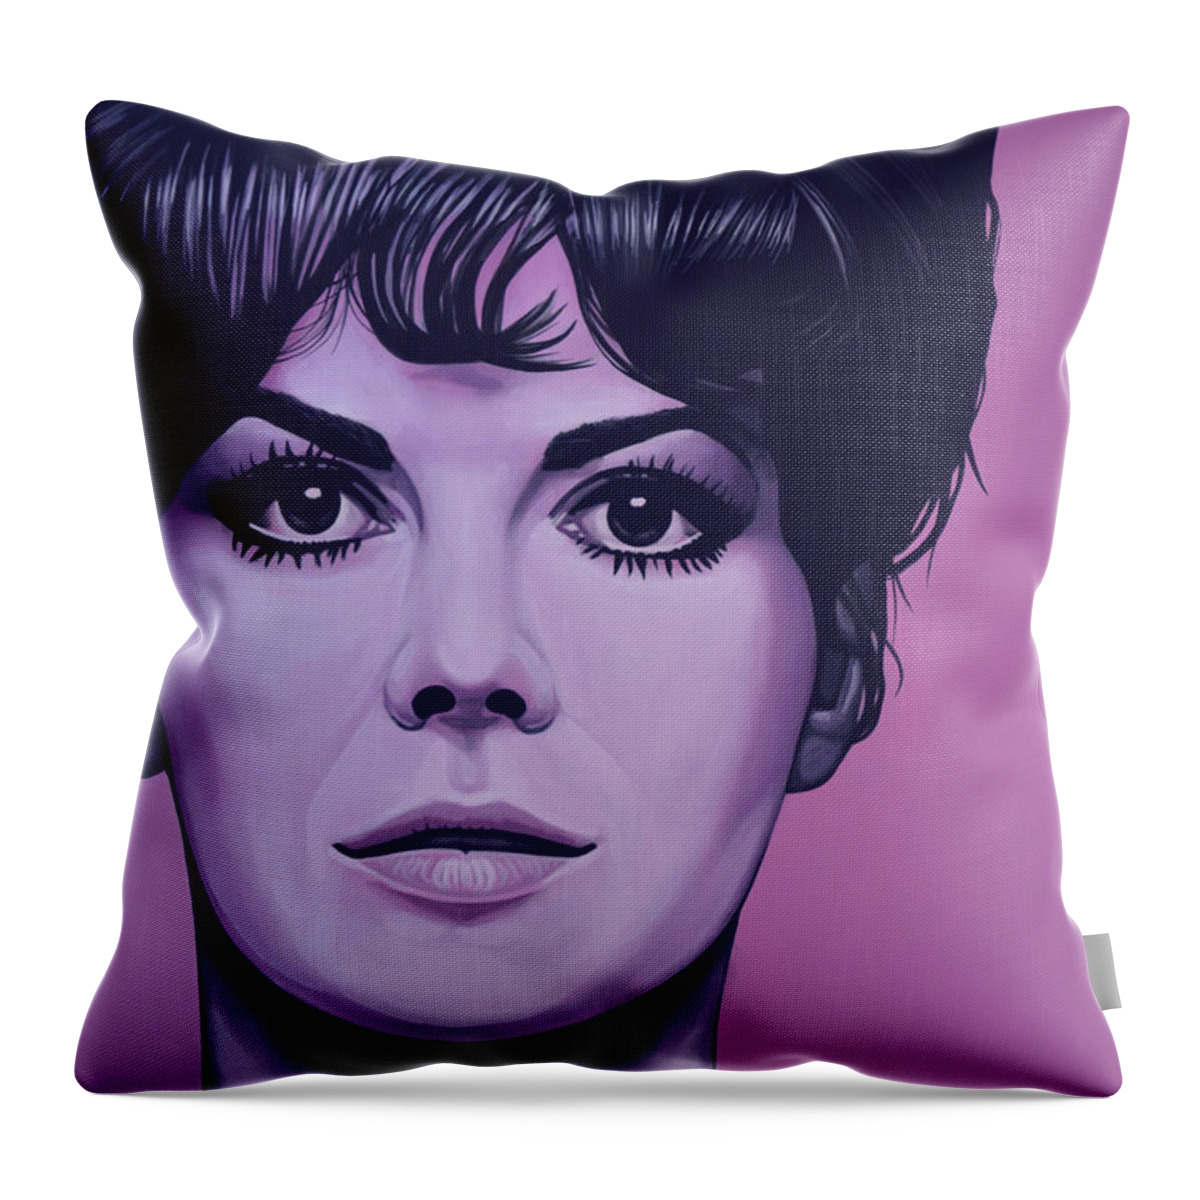 Natalie Wood Throw Pillow featuring the painting Natalie Wood by Paul Meijering